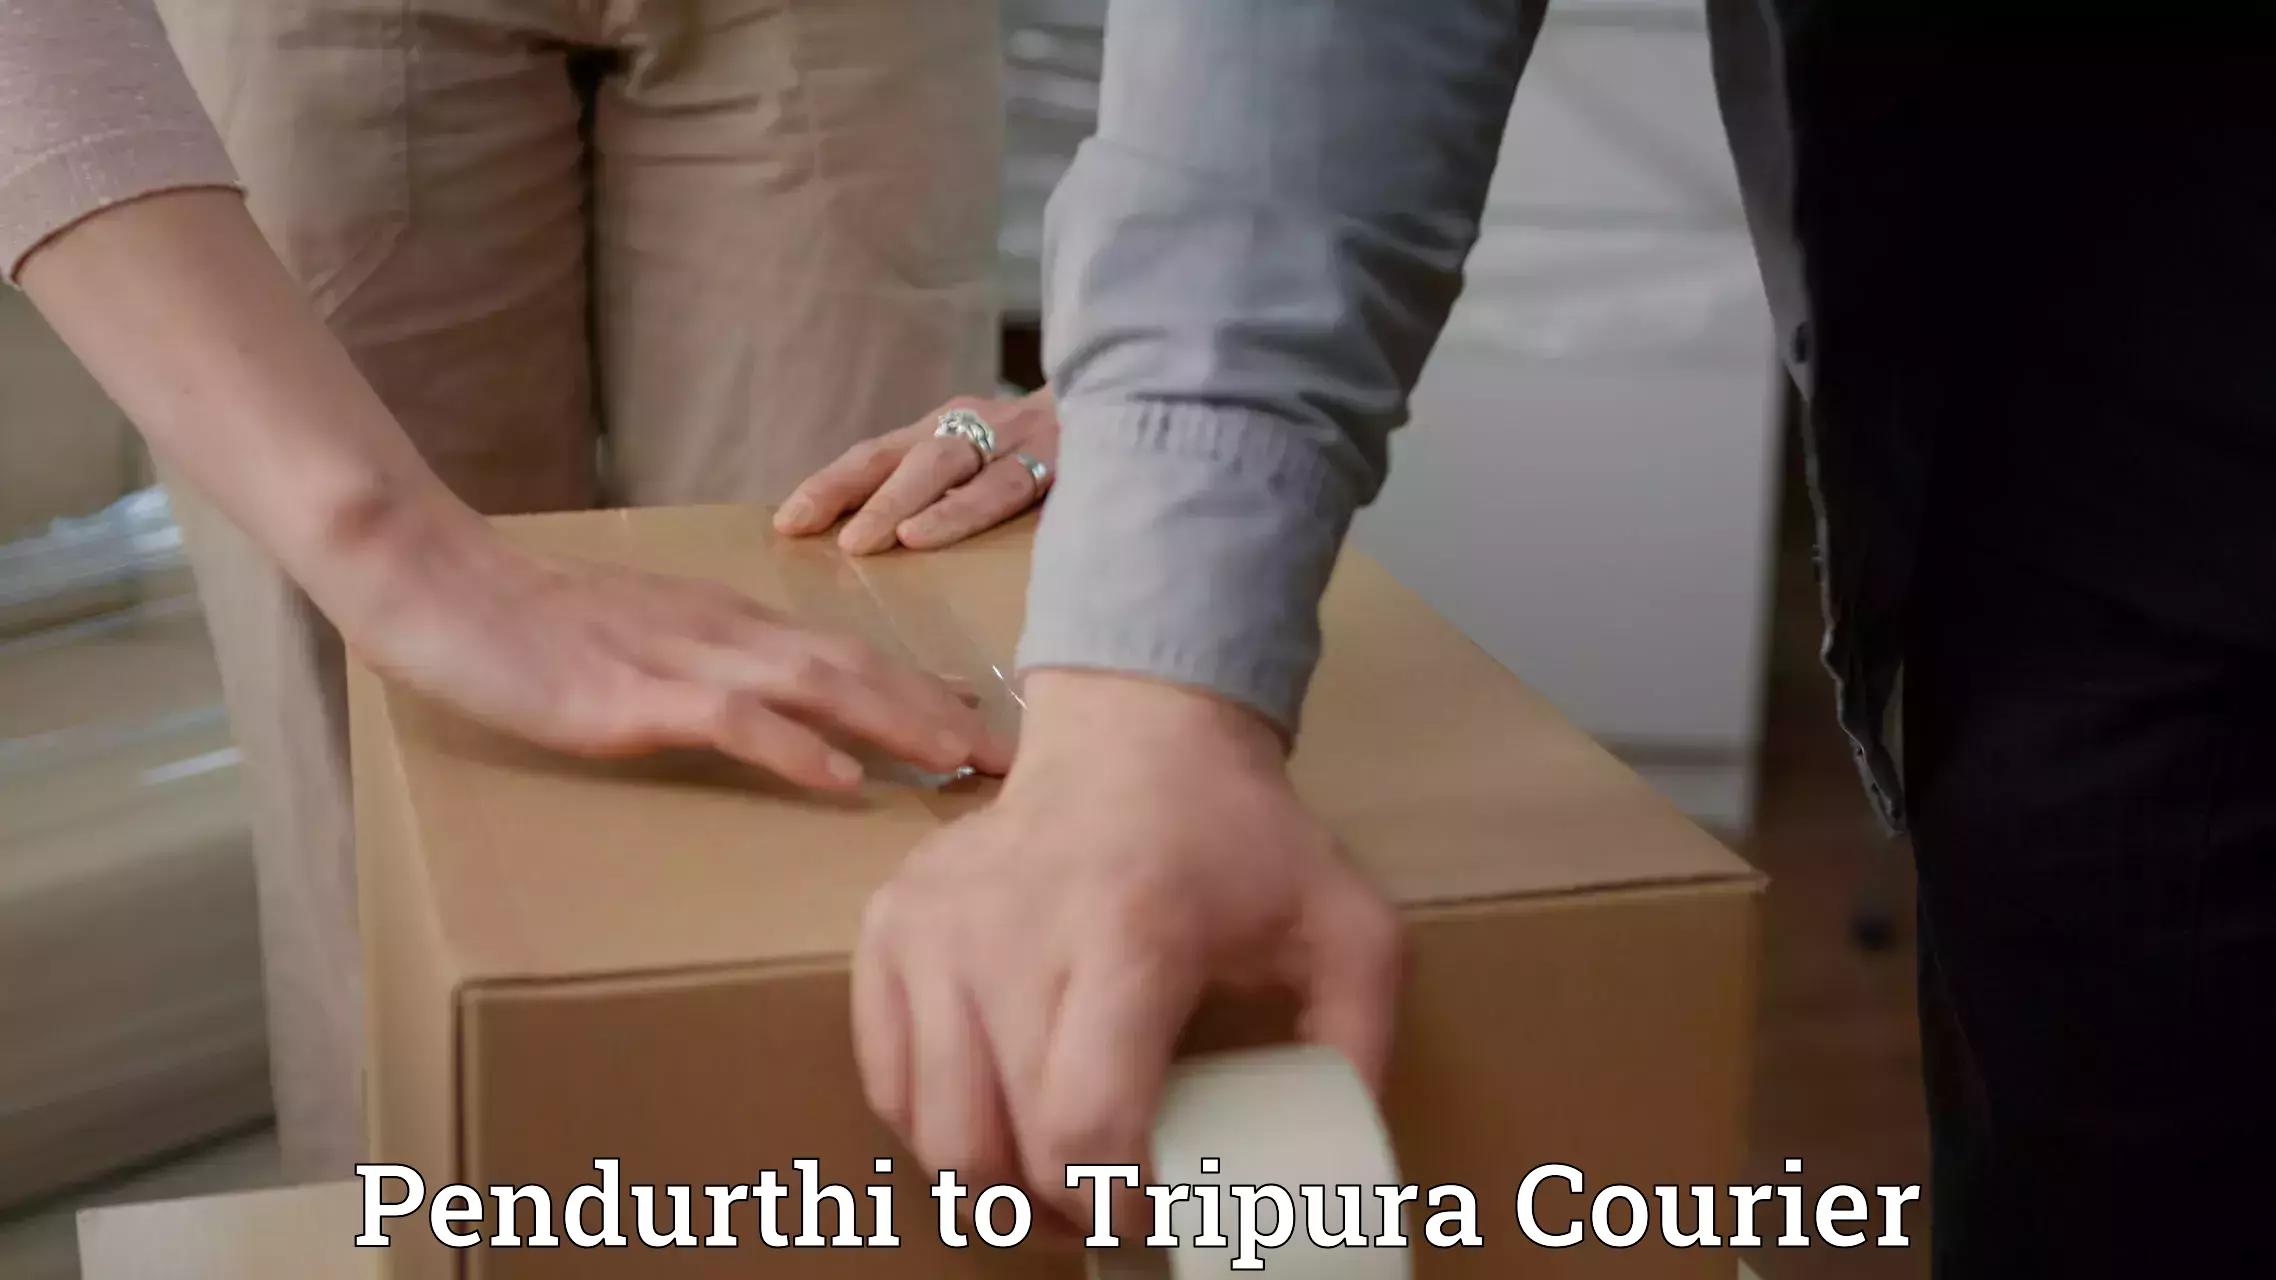 Professional courier services Pendurthi to Udaipur Tripura